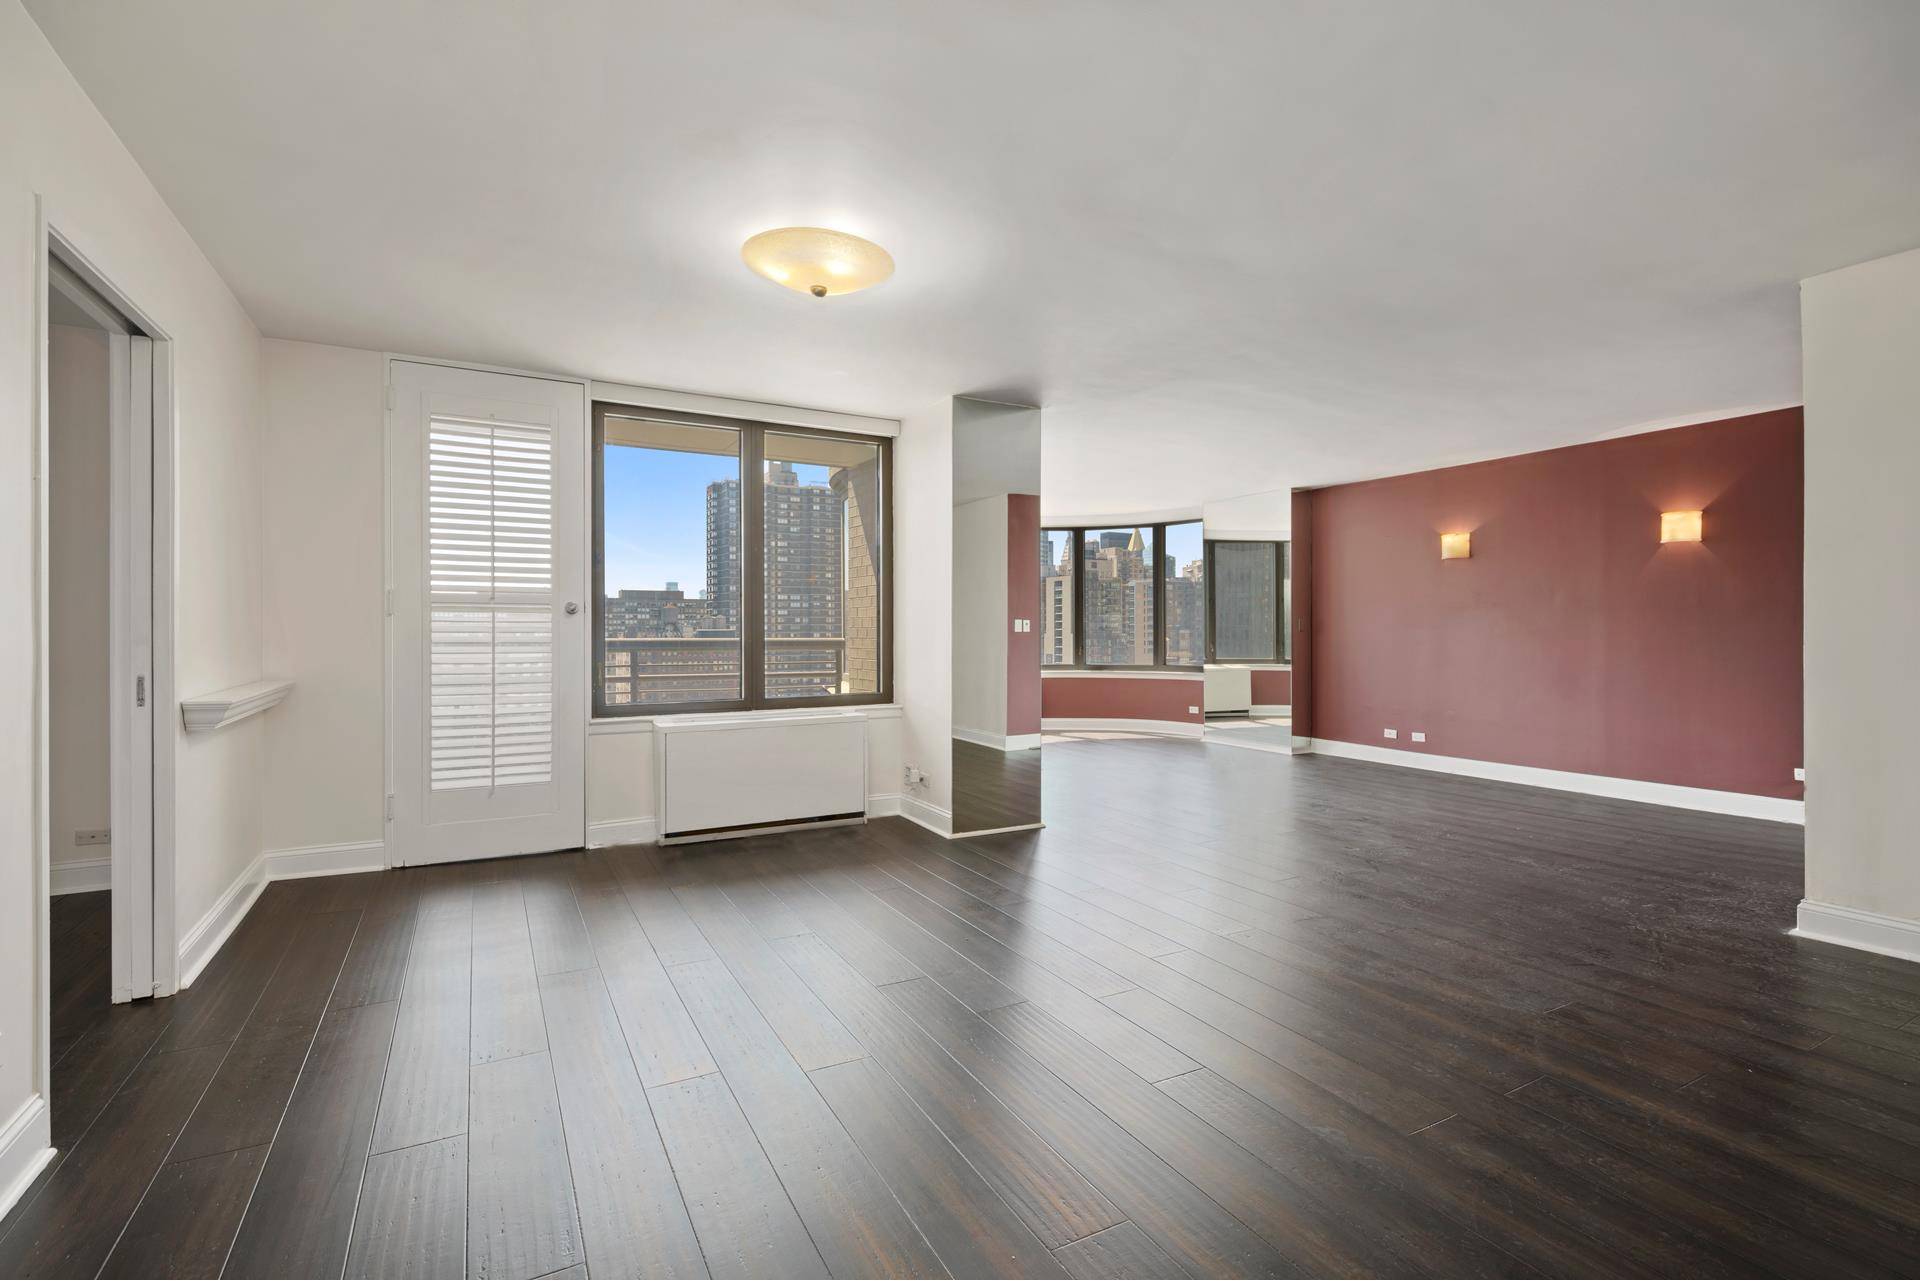 Welcome to the Corinthian at 330 East 38th Street, Unit 18Q This sun flooded 2 bedroom easily converted into a 3 bedroom condo offers breathtaking river and skyline views.